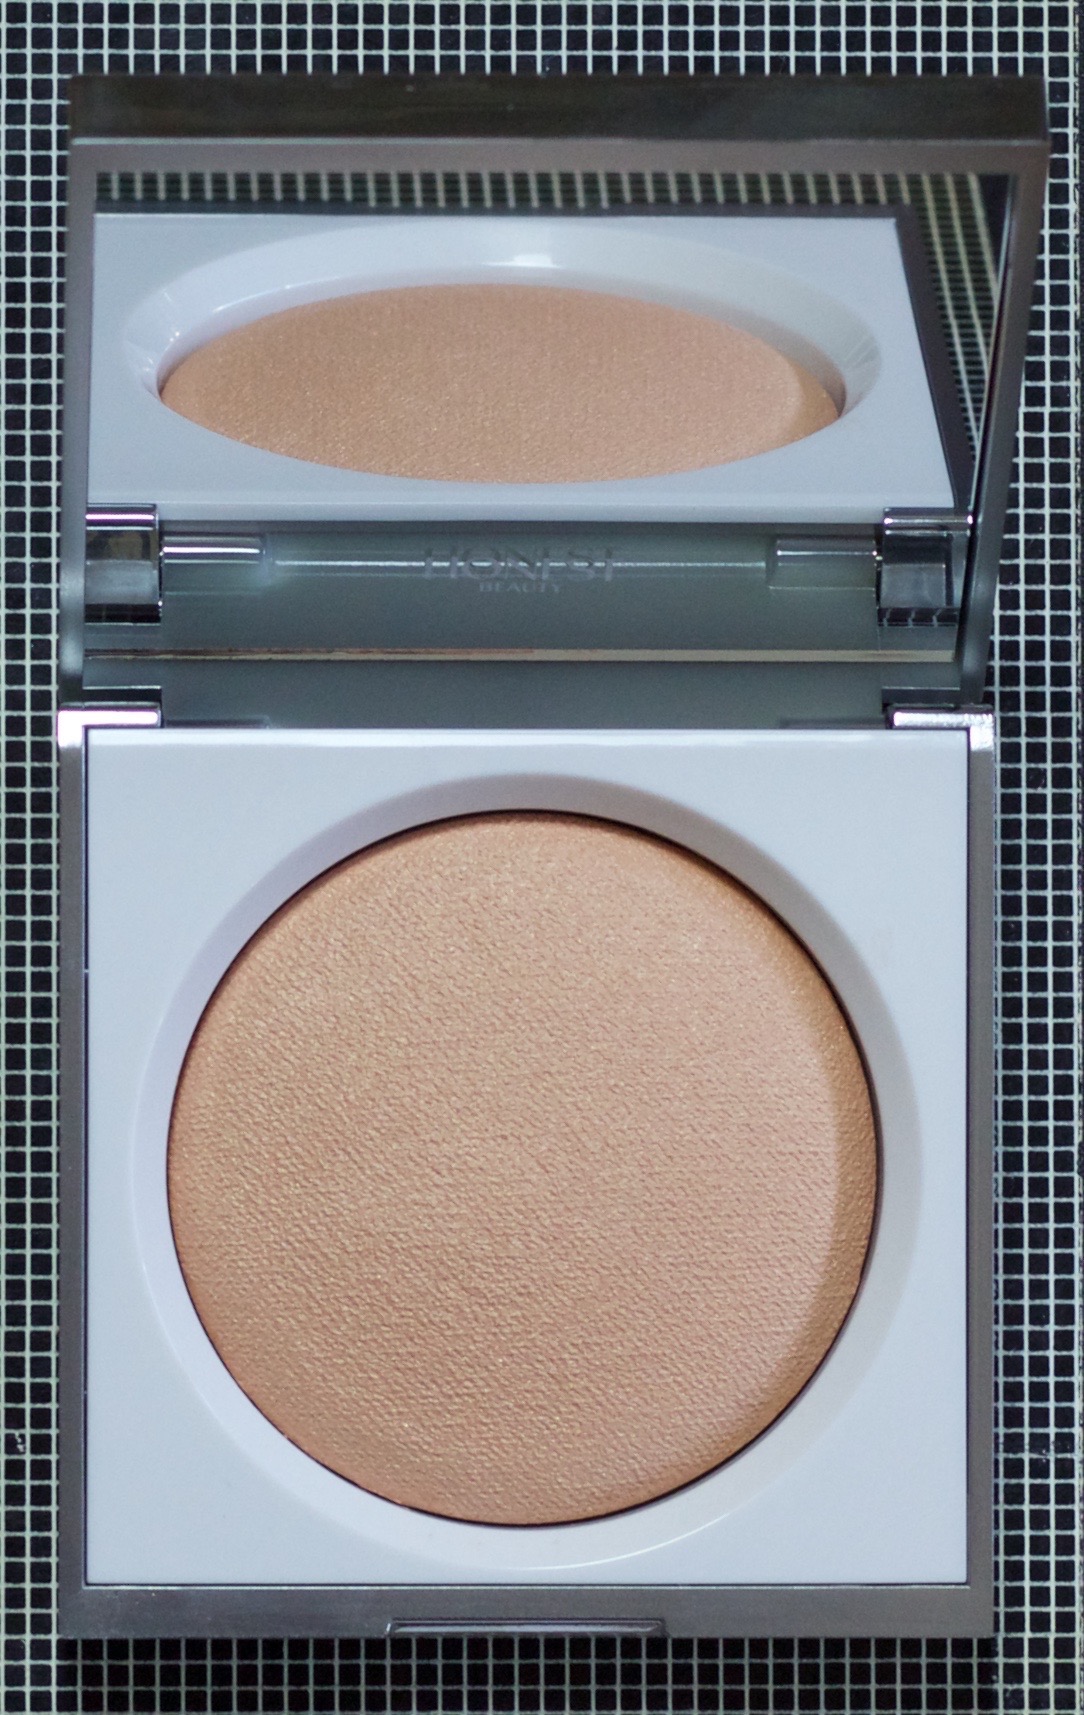 The new Luminizing Powders from Honest Beauty can be used to sculpt, highlight or set.